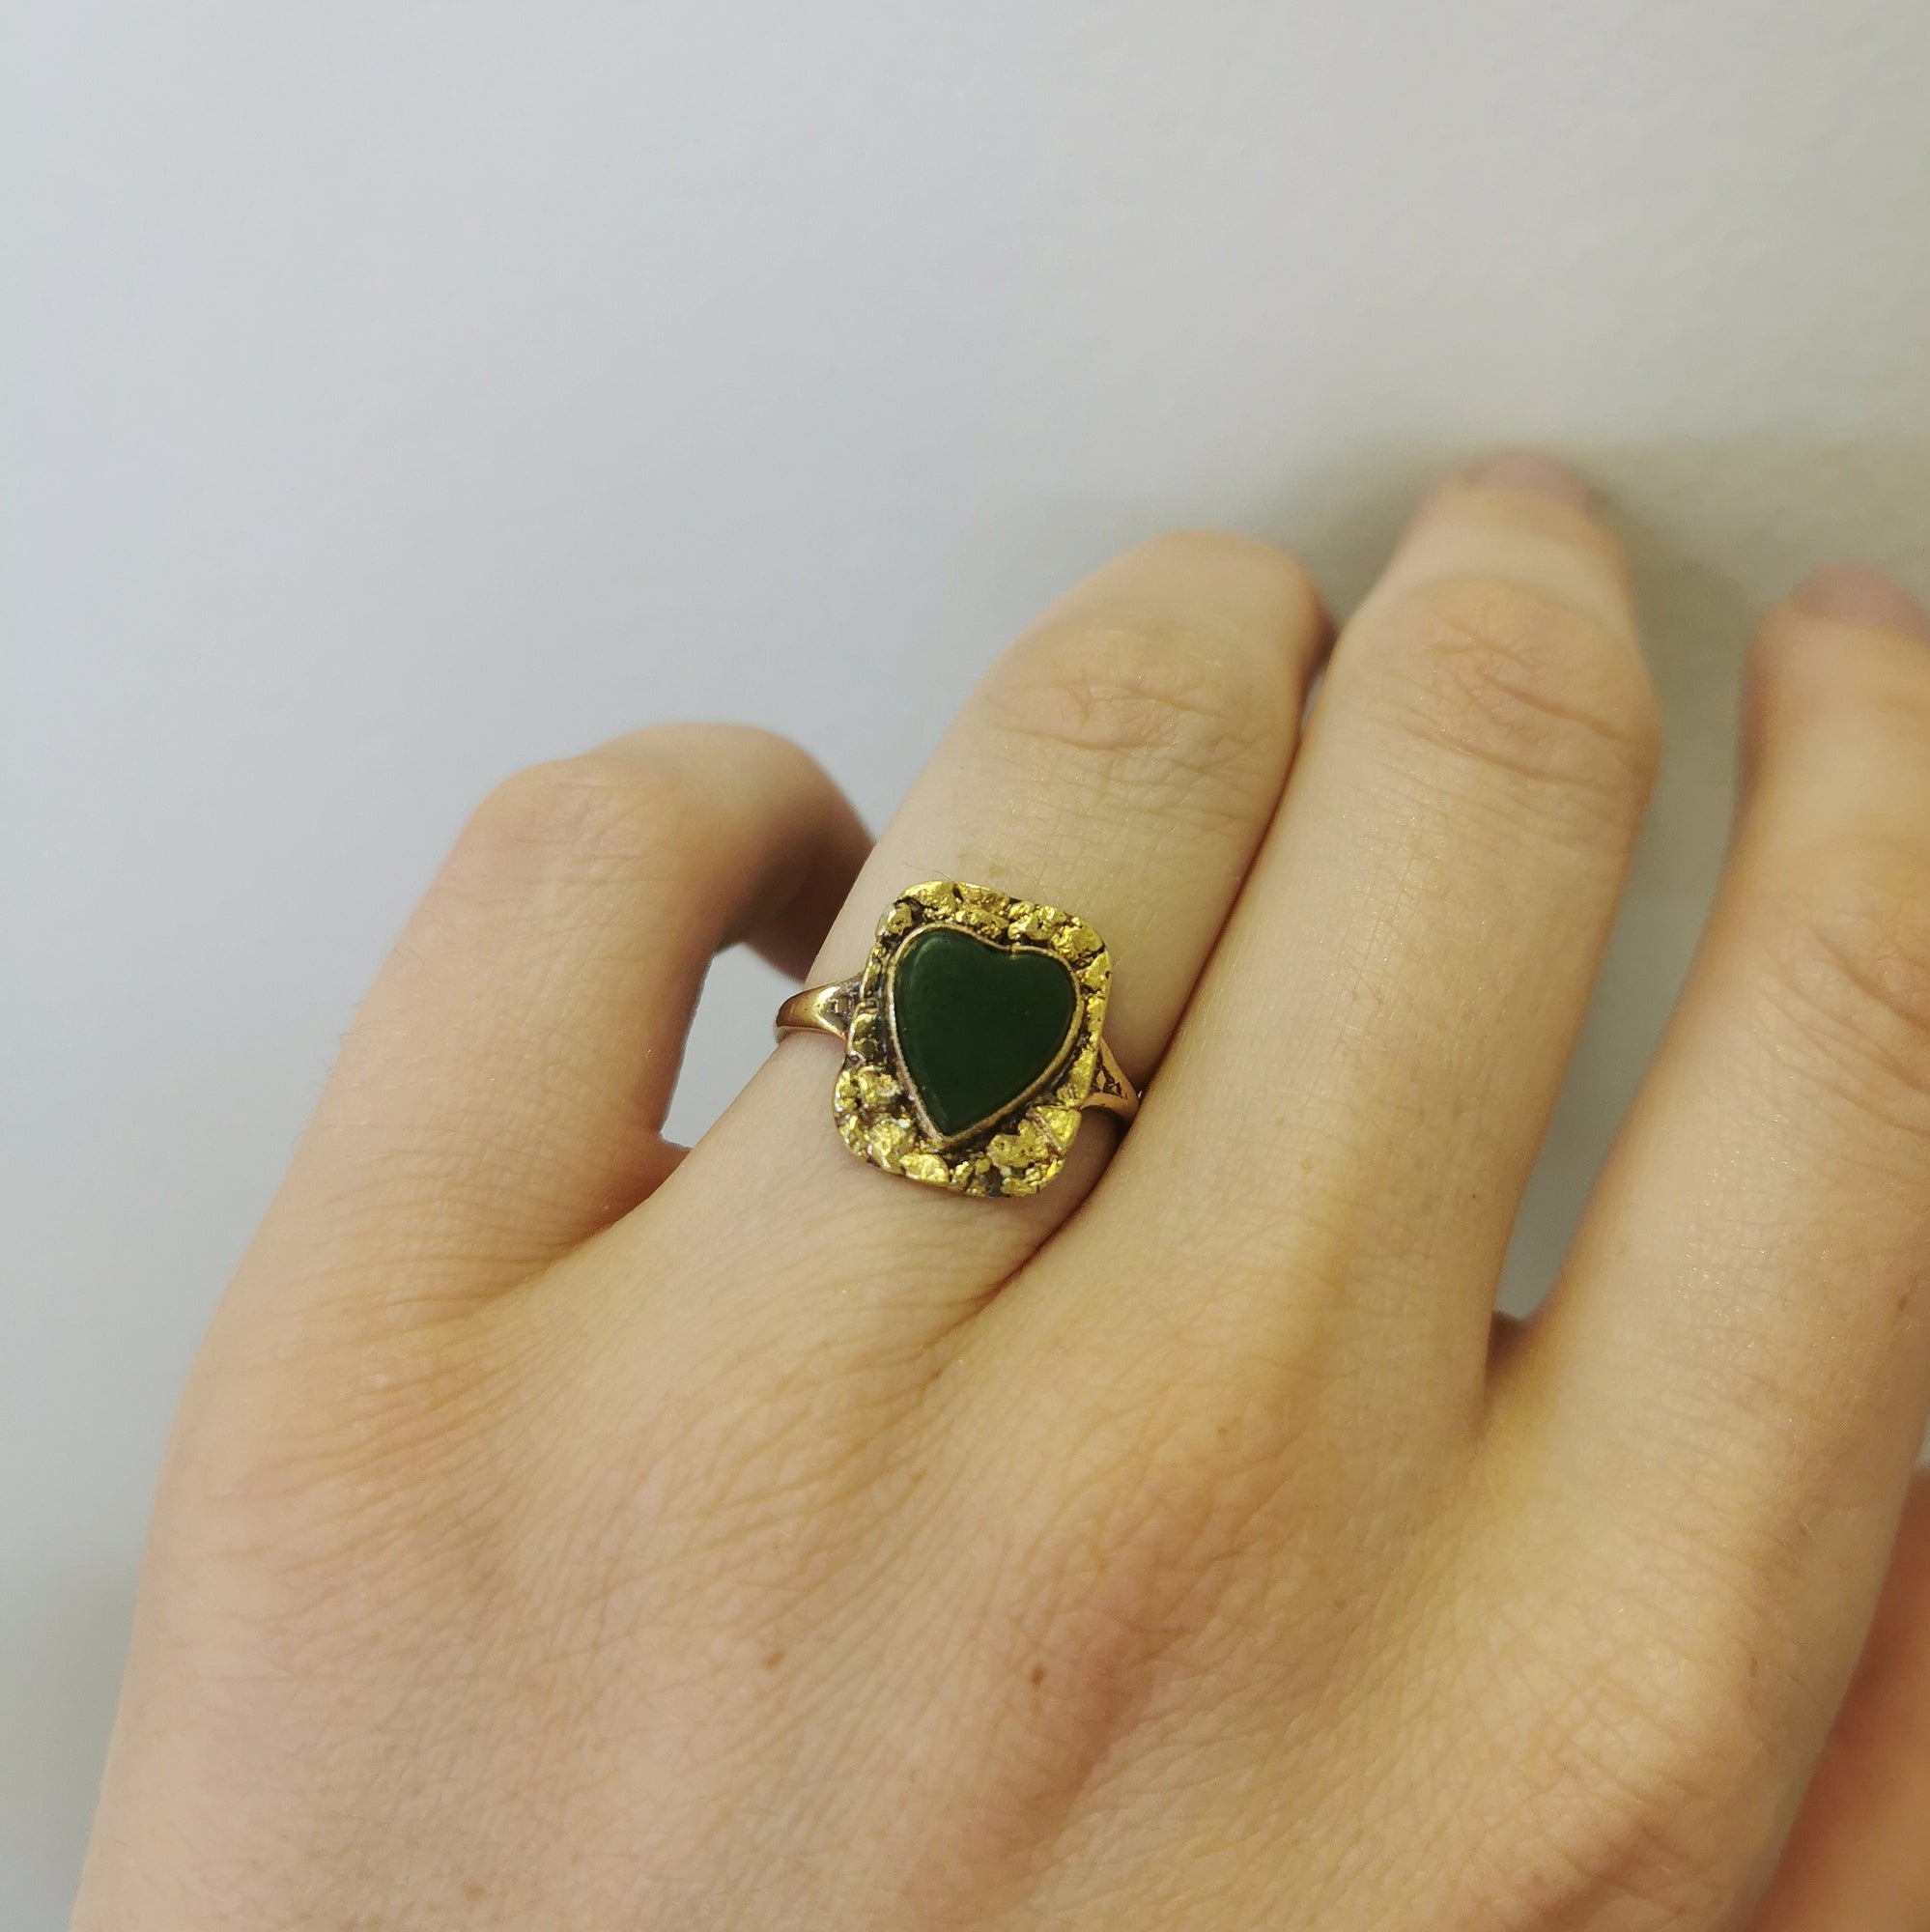 Nephrite Heart & Gold Nugget Ring | 1.25ct |